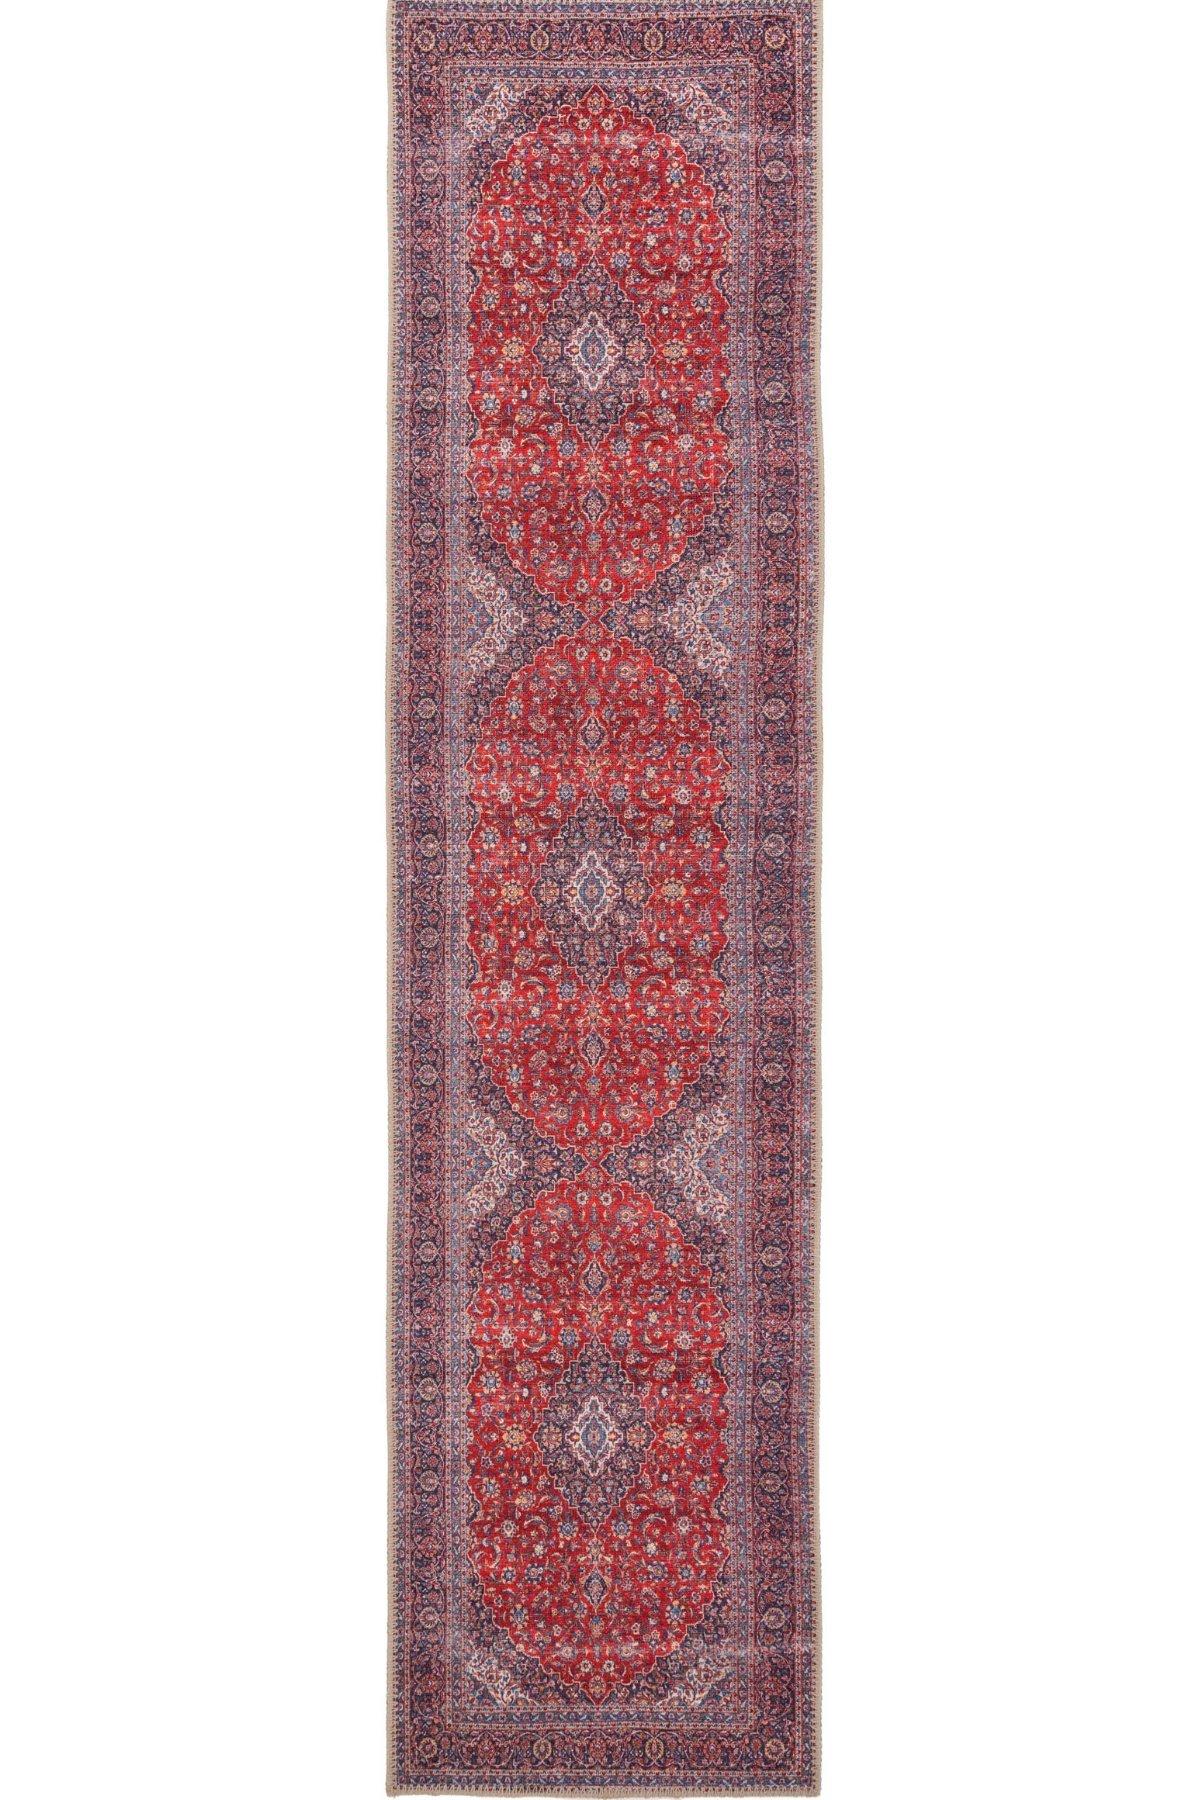 Red Traditional Floral Hallway Runner Rug Non Slip & Washable